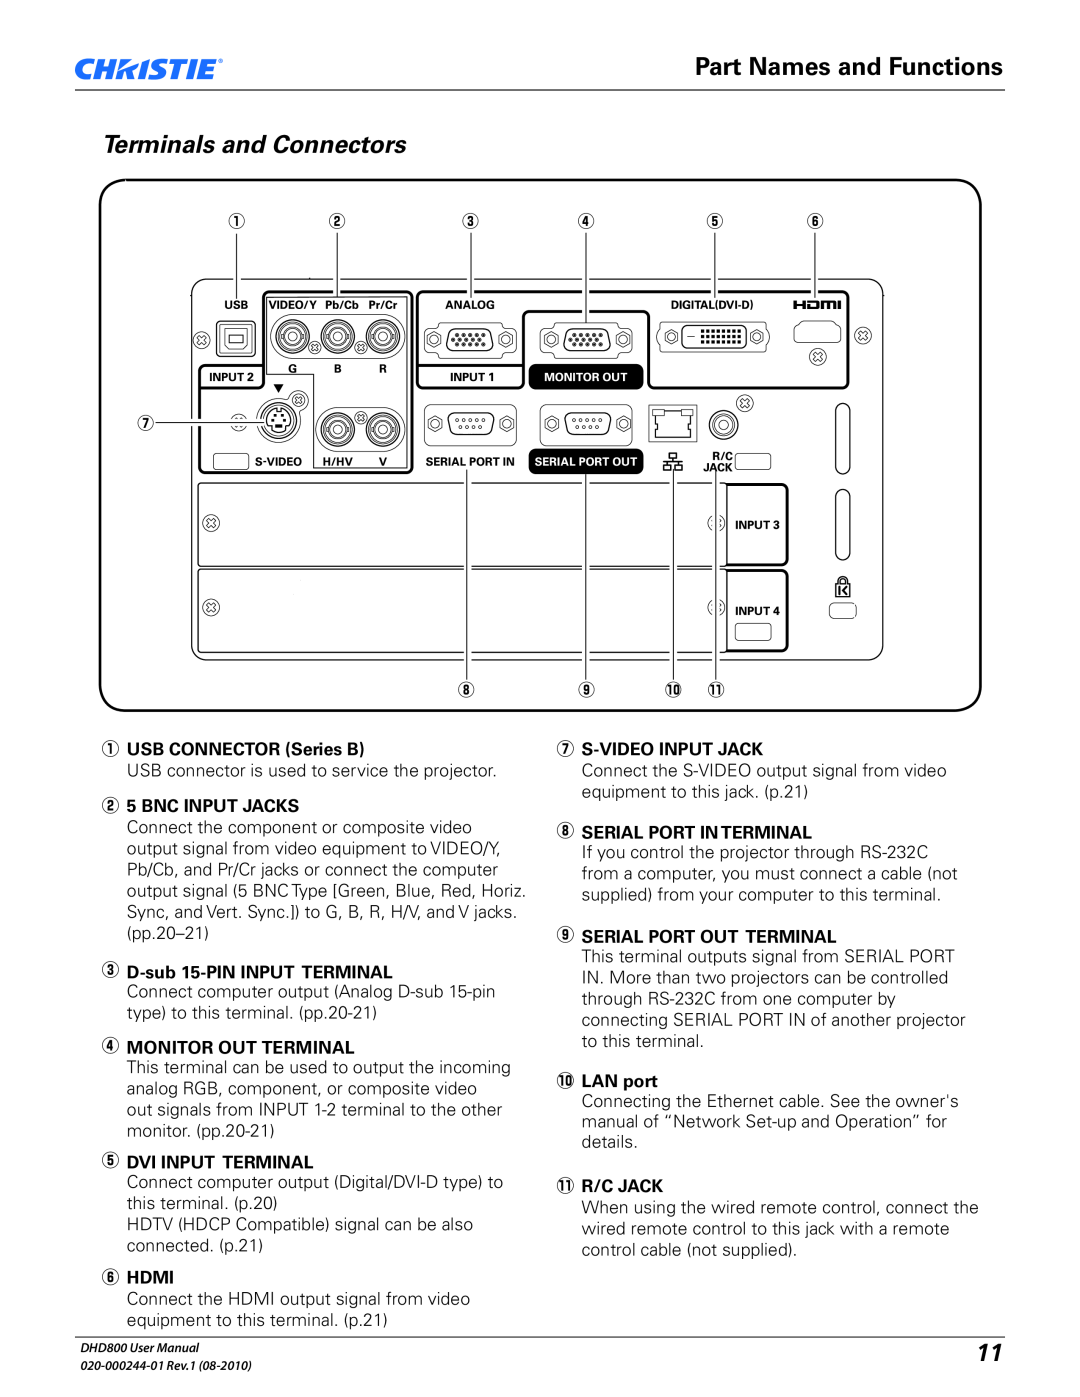 Christie Digital Systems DHD800 user manual Part Names and Functions, Terminals and Connectors 